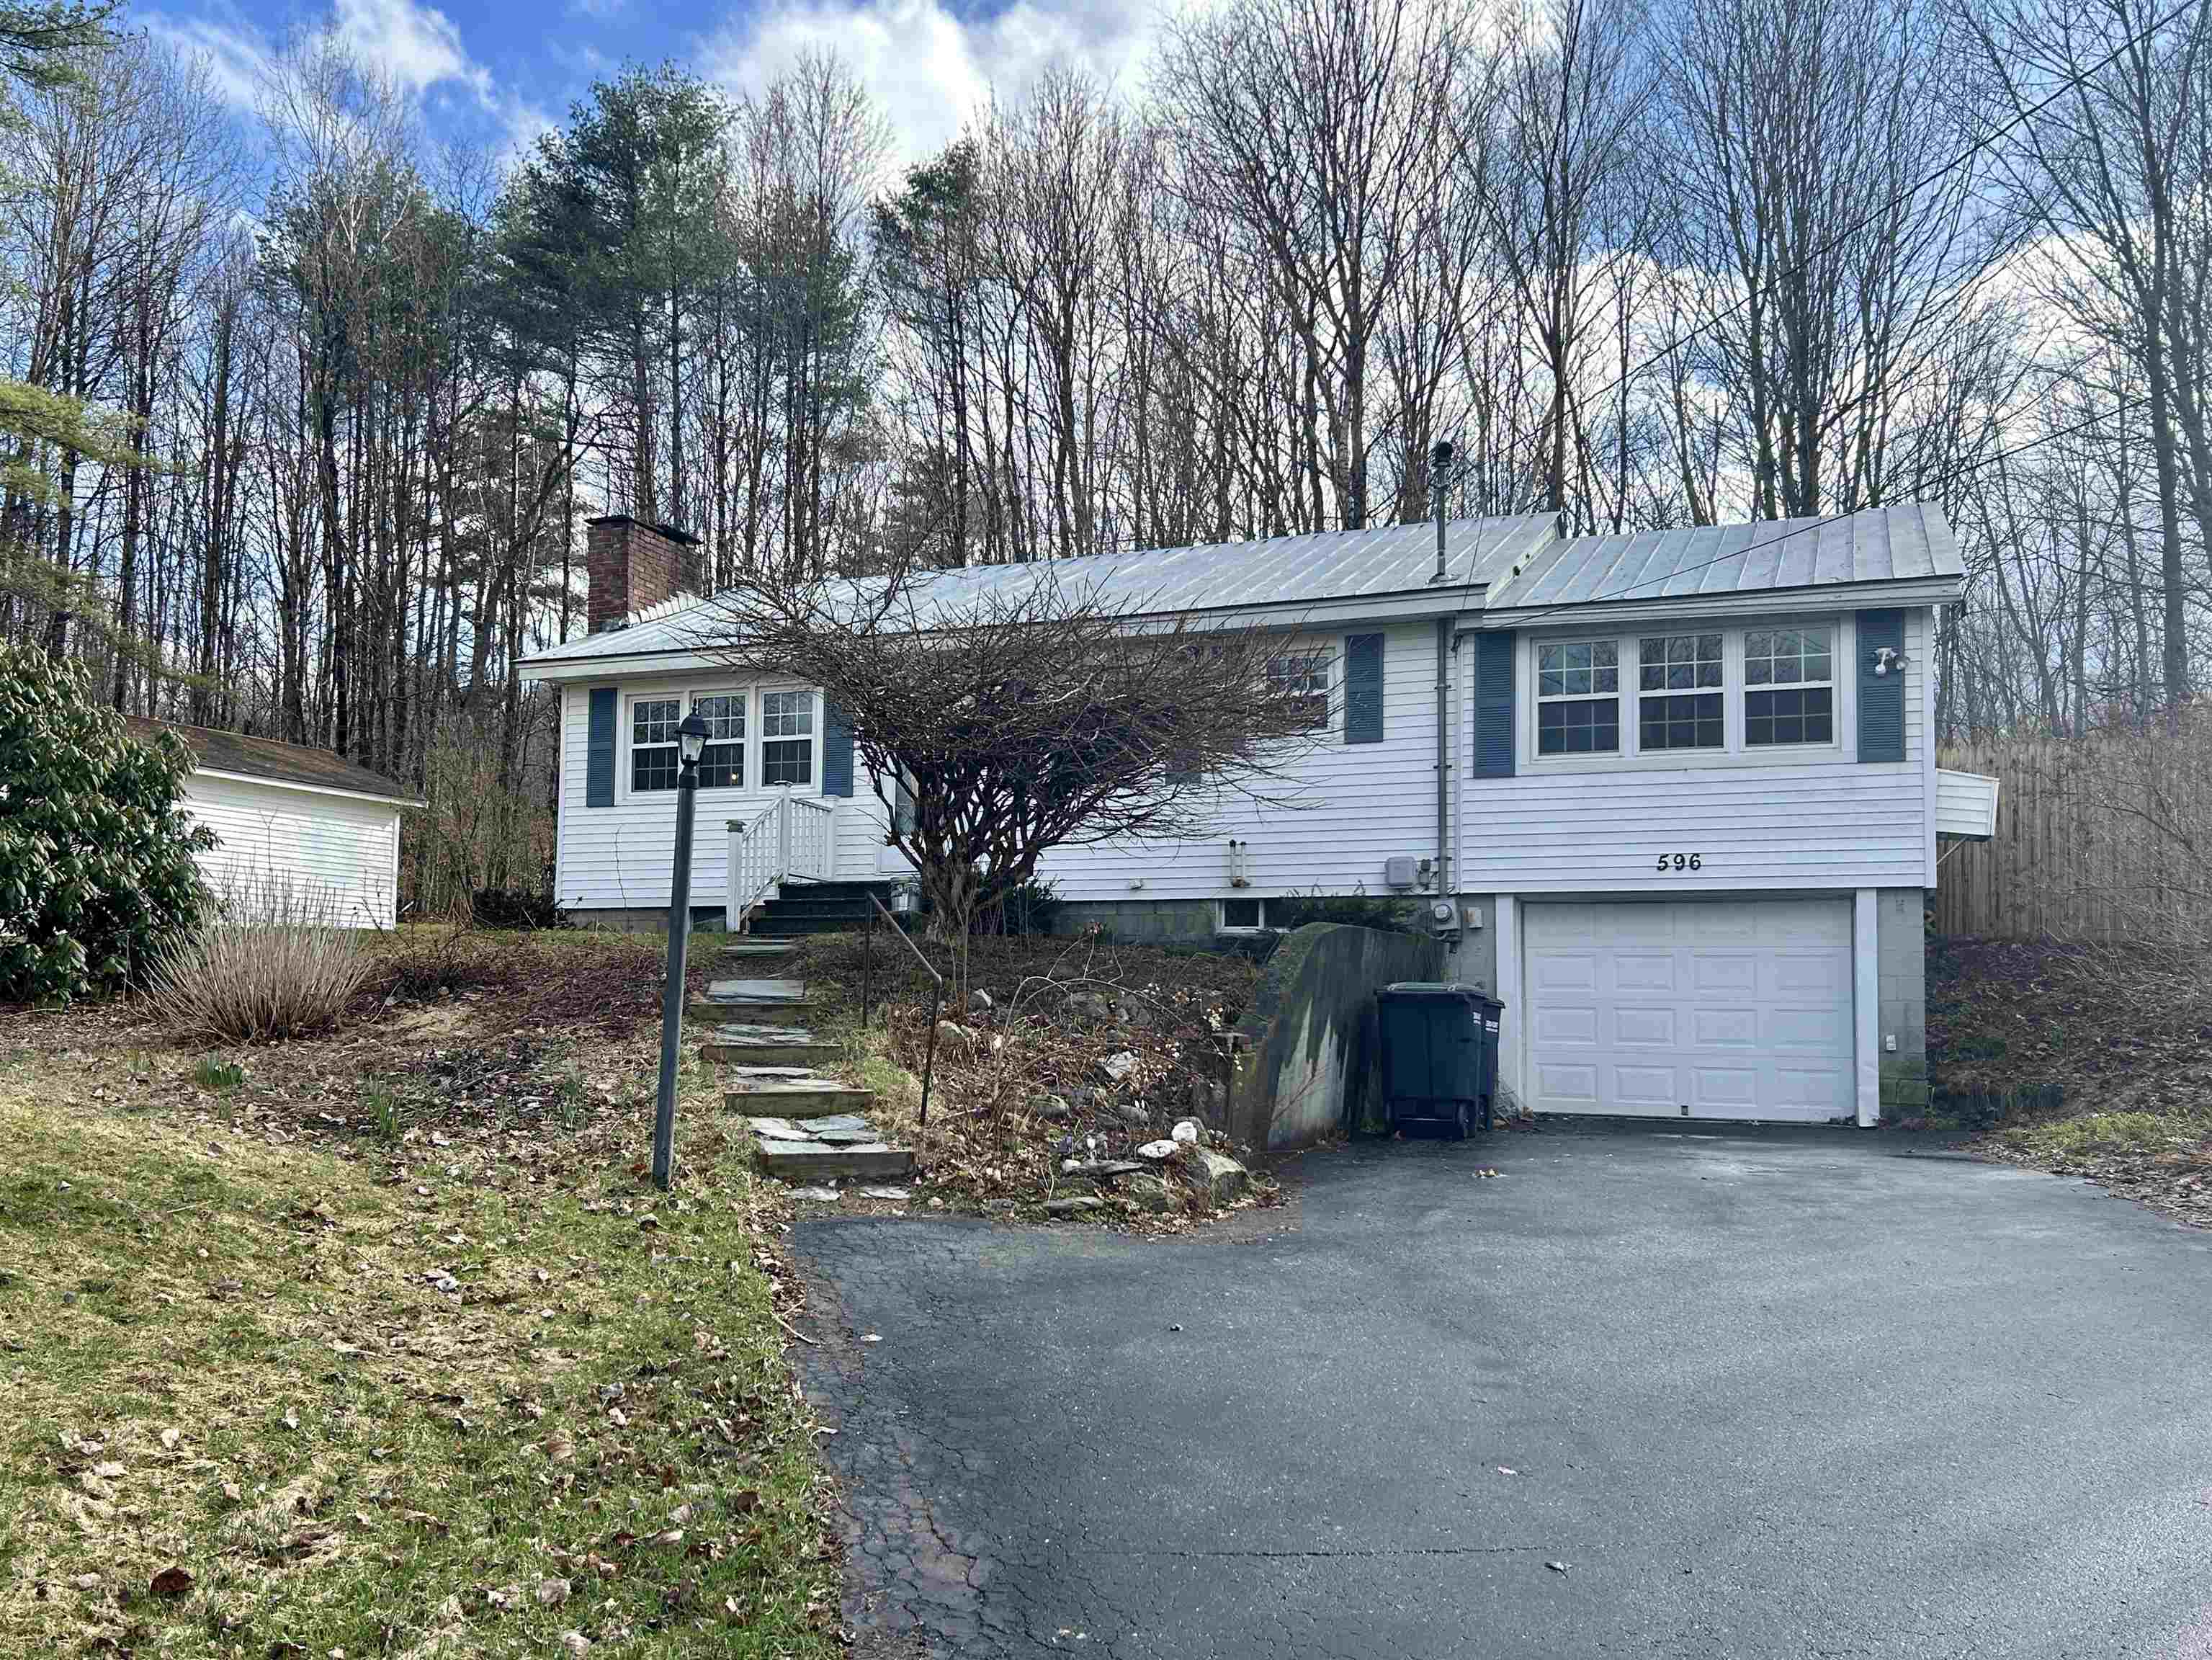 ENFIELD NH Homes for sale